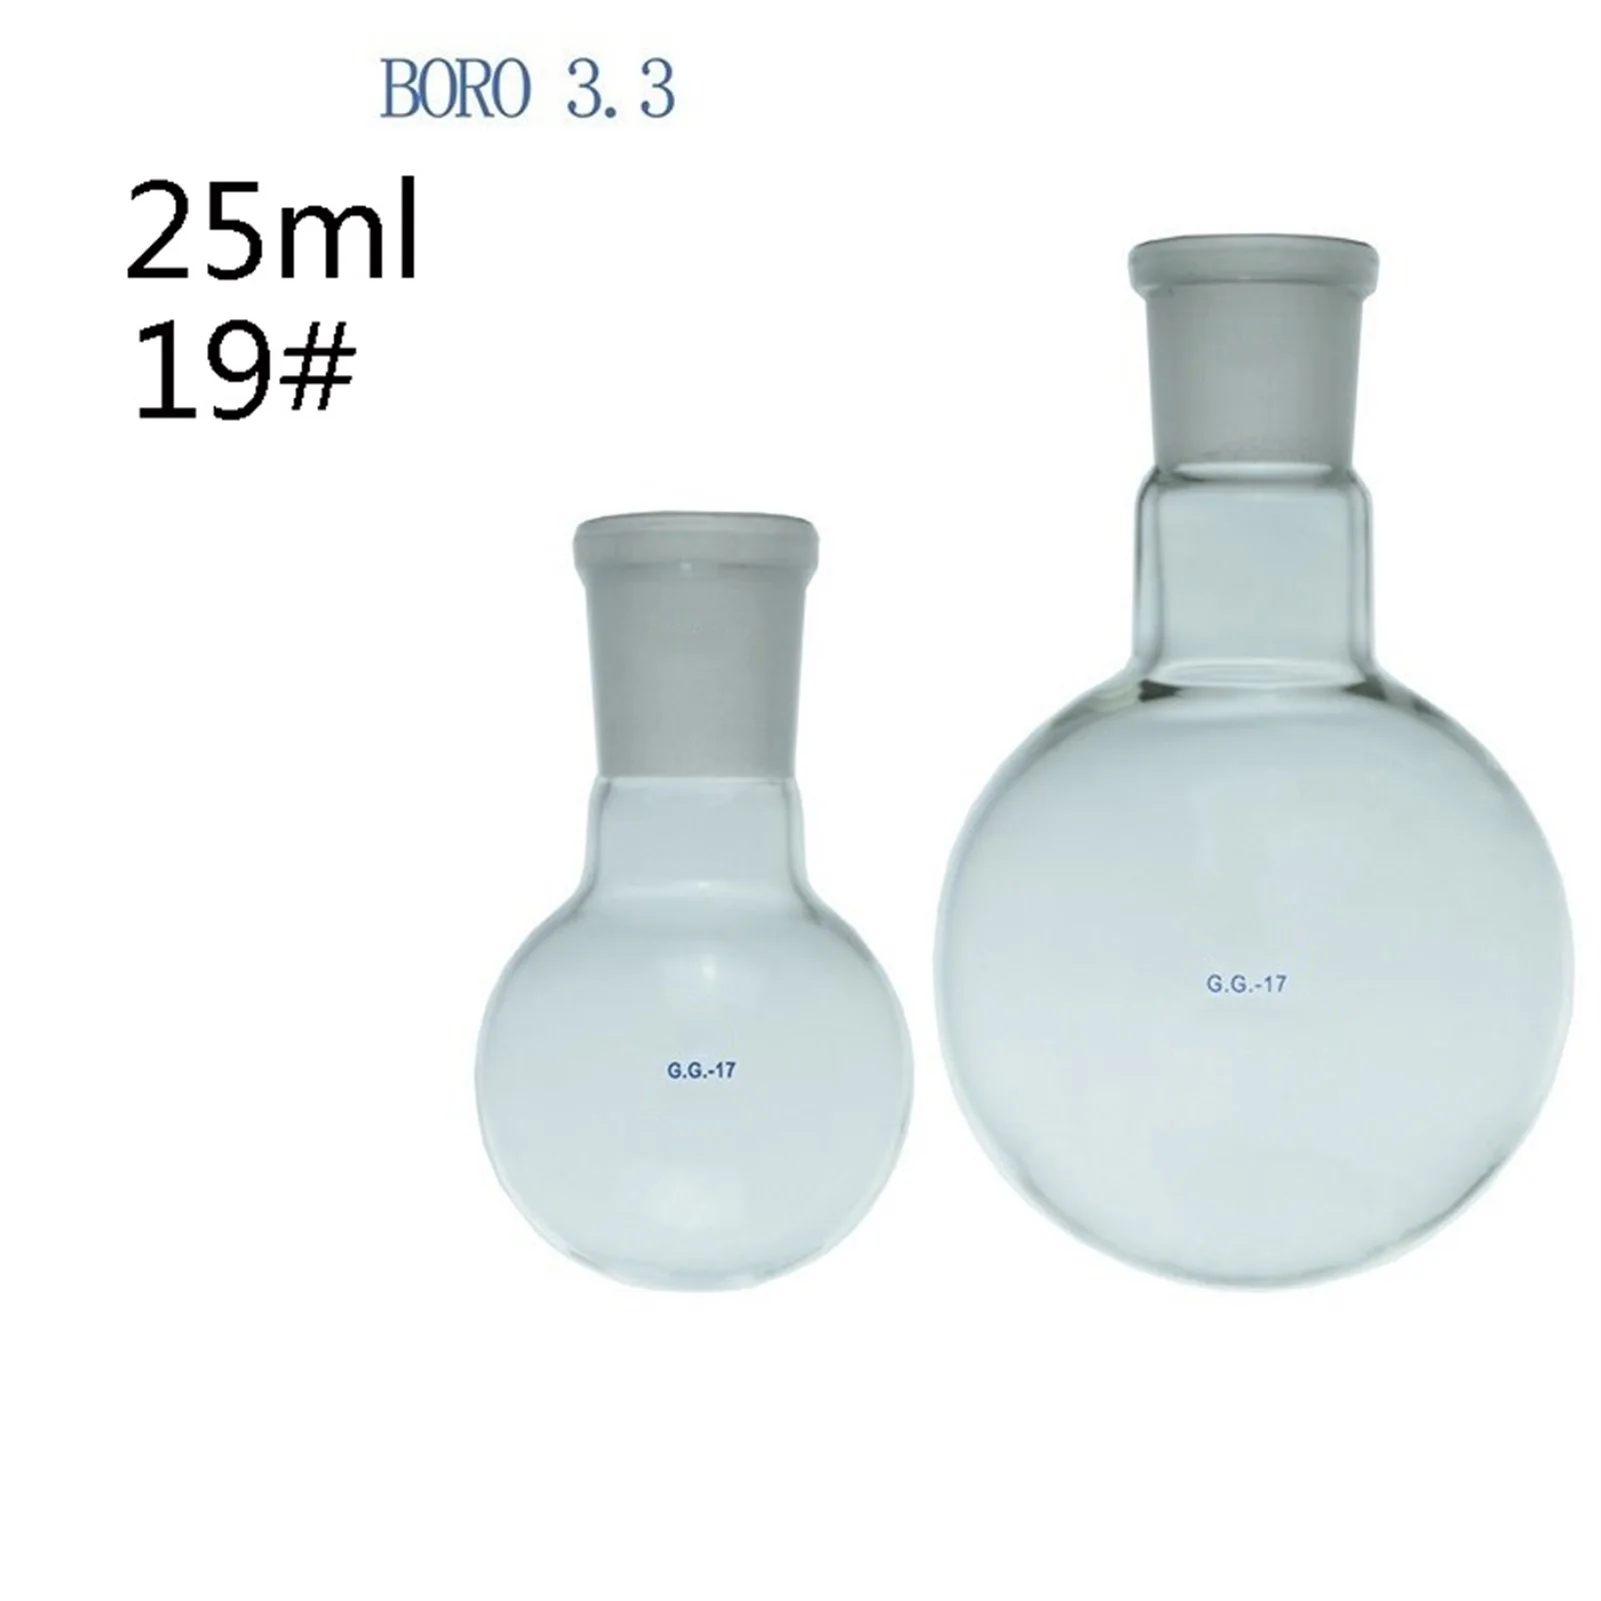 

25ml Boiling Flask Round Bottom 19# Ground Mouth Borosilicate 3.3 Glass Heat Resistant Lab Distilling Flasks- Pack Of 1